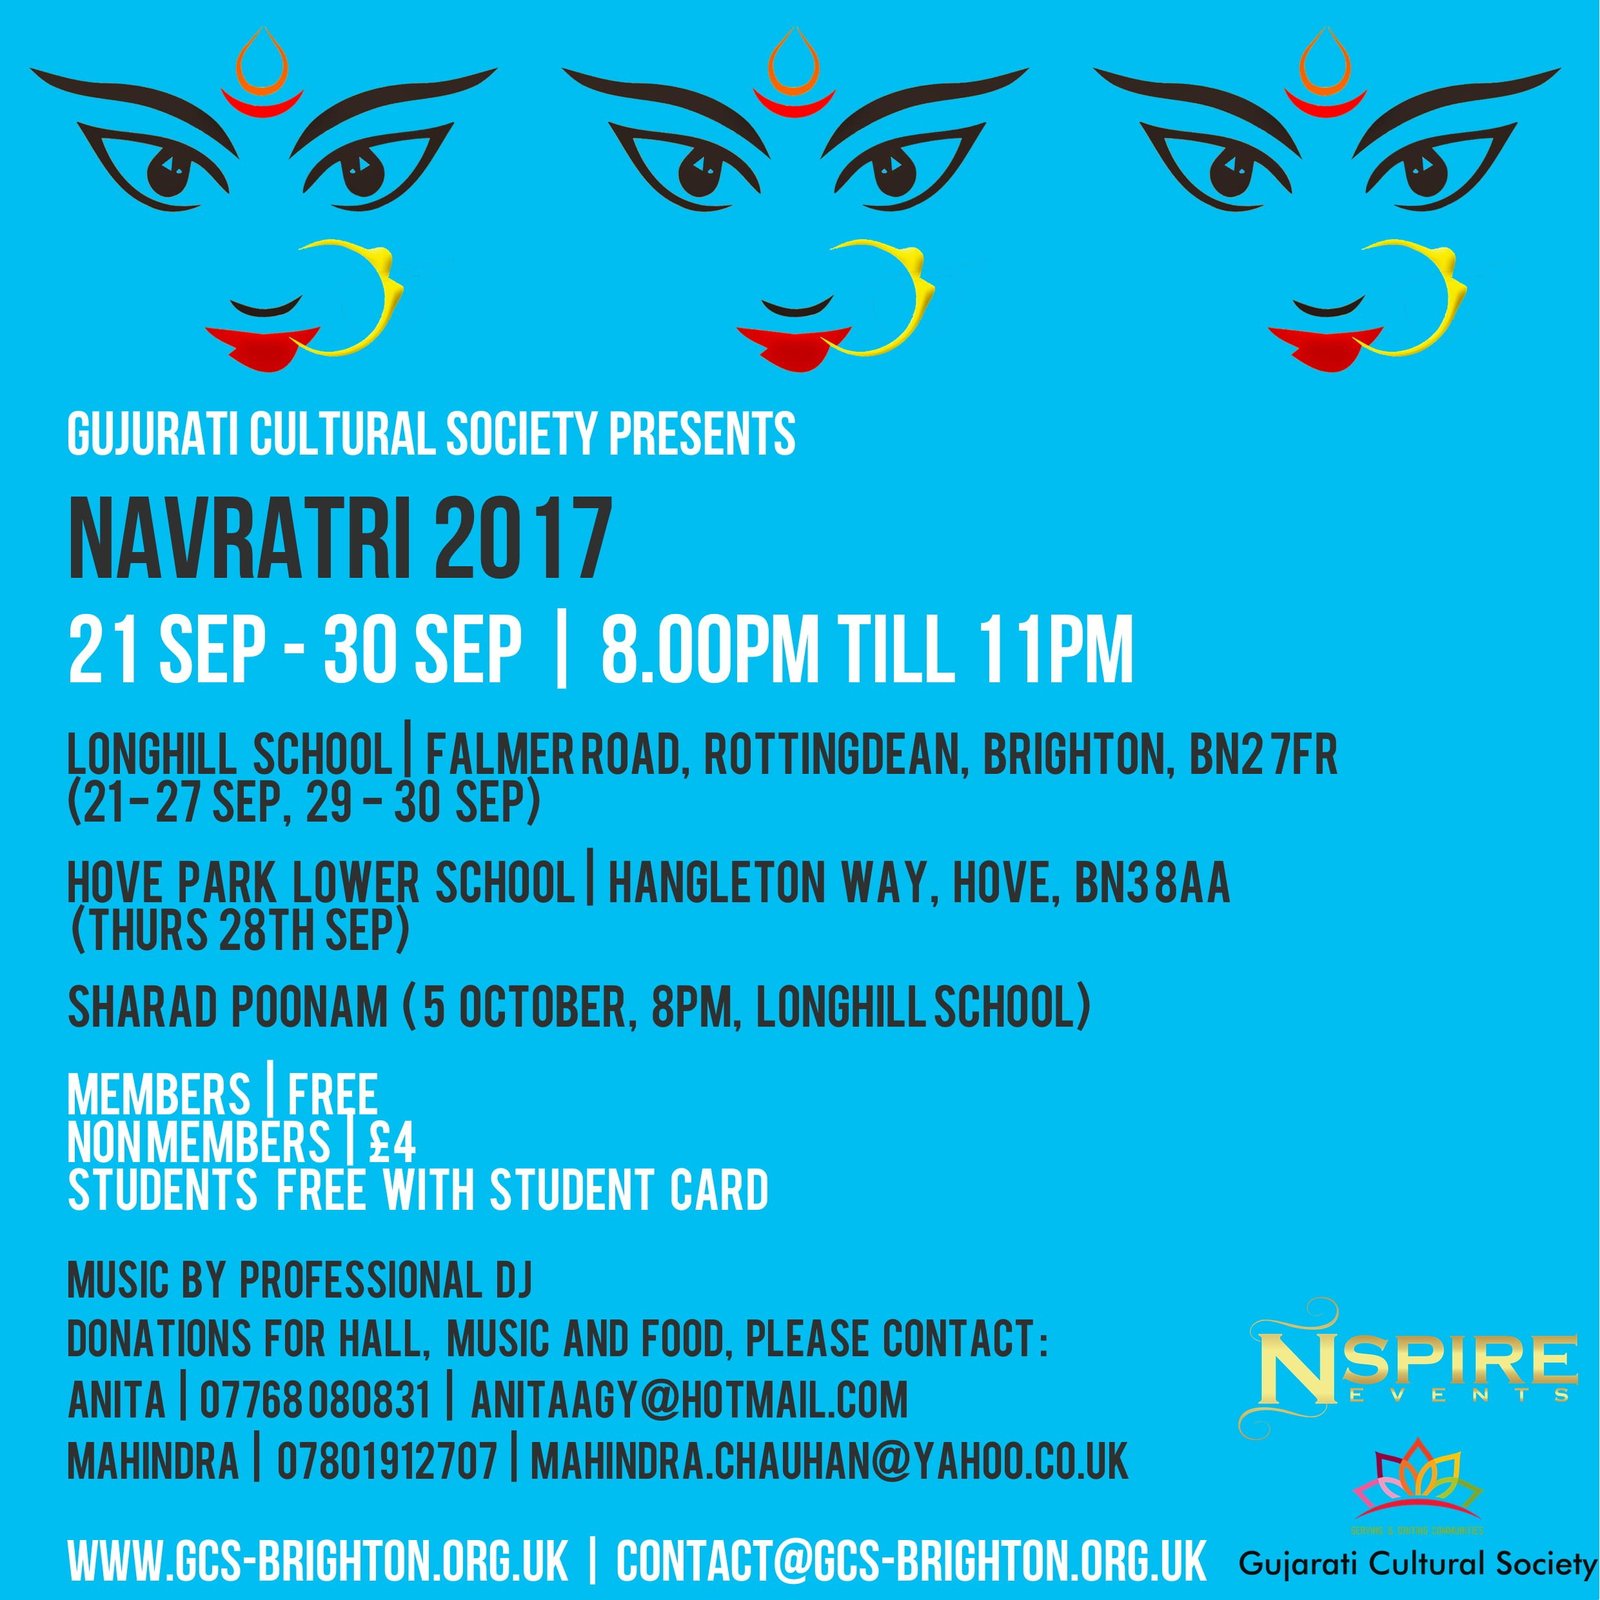 Reminder: Navratri this Thursday 28th September 2017 is at a different venue!